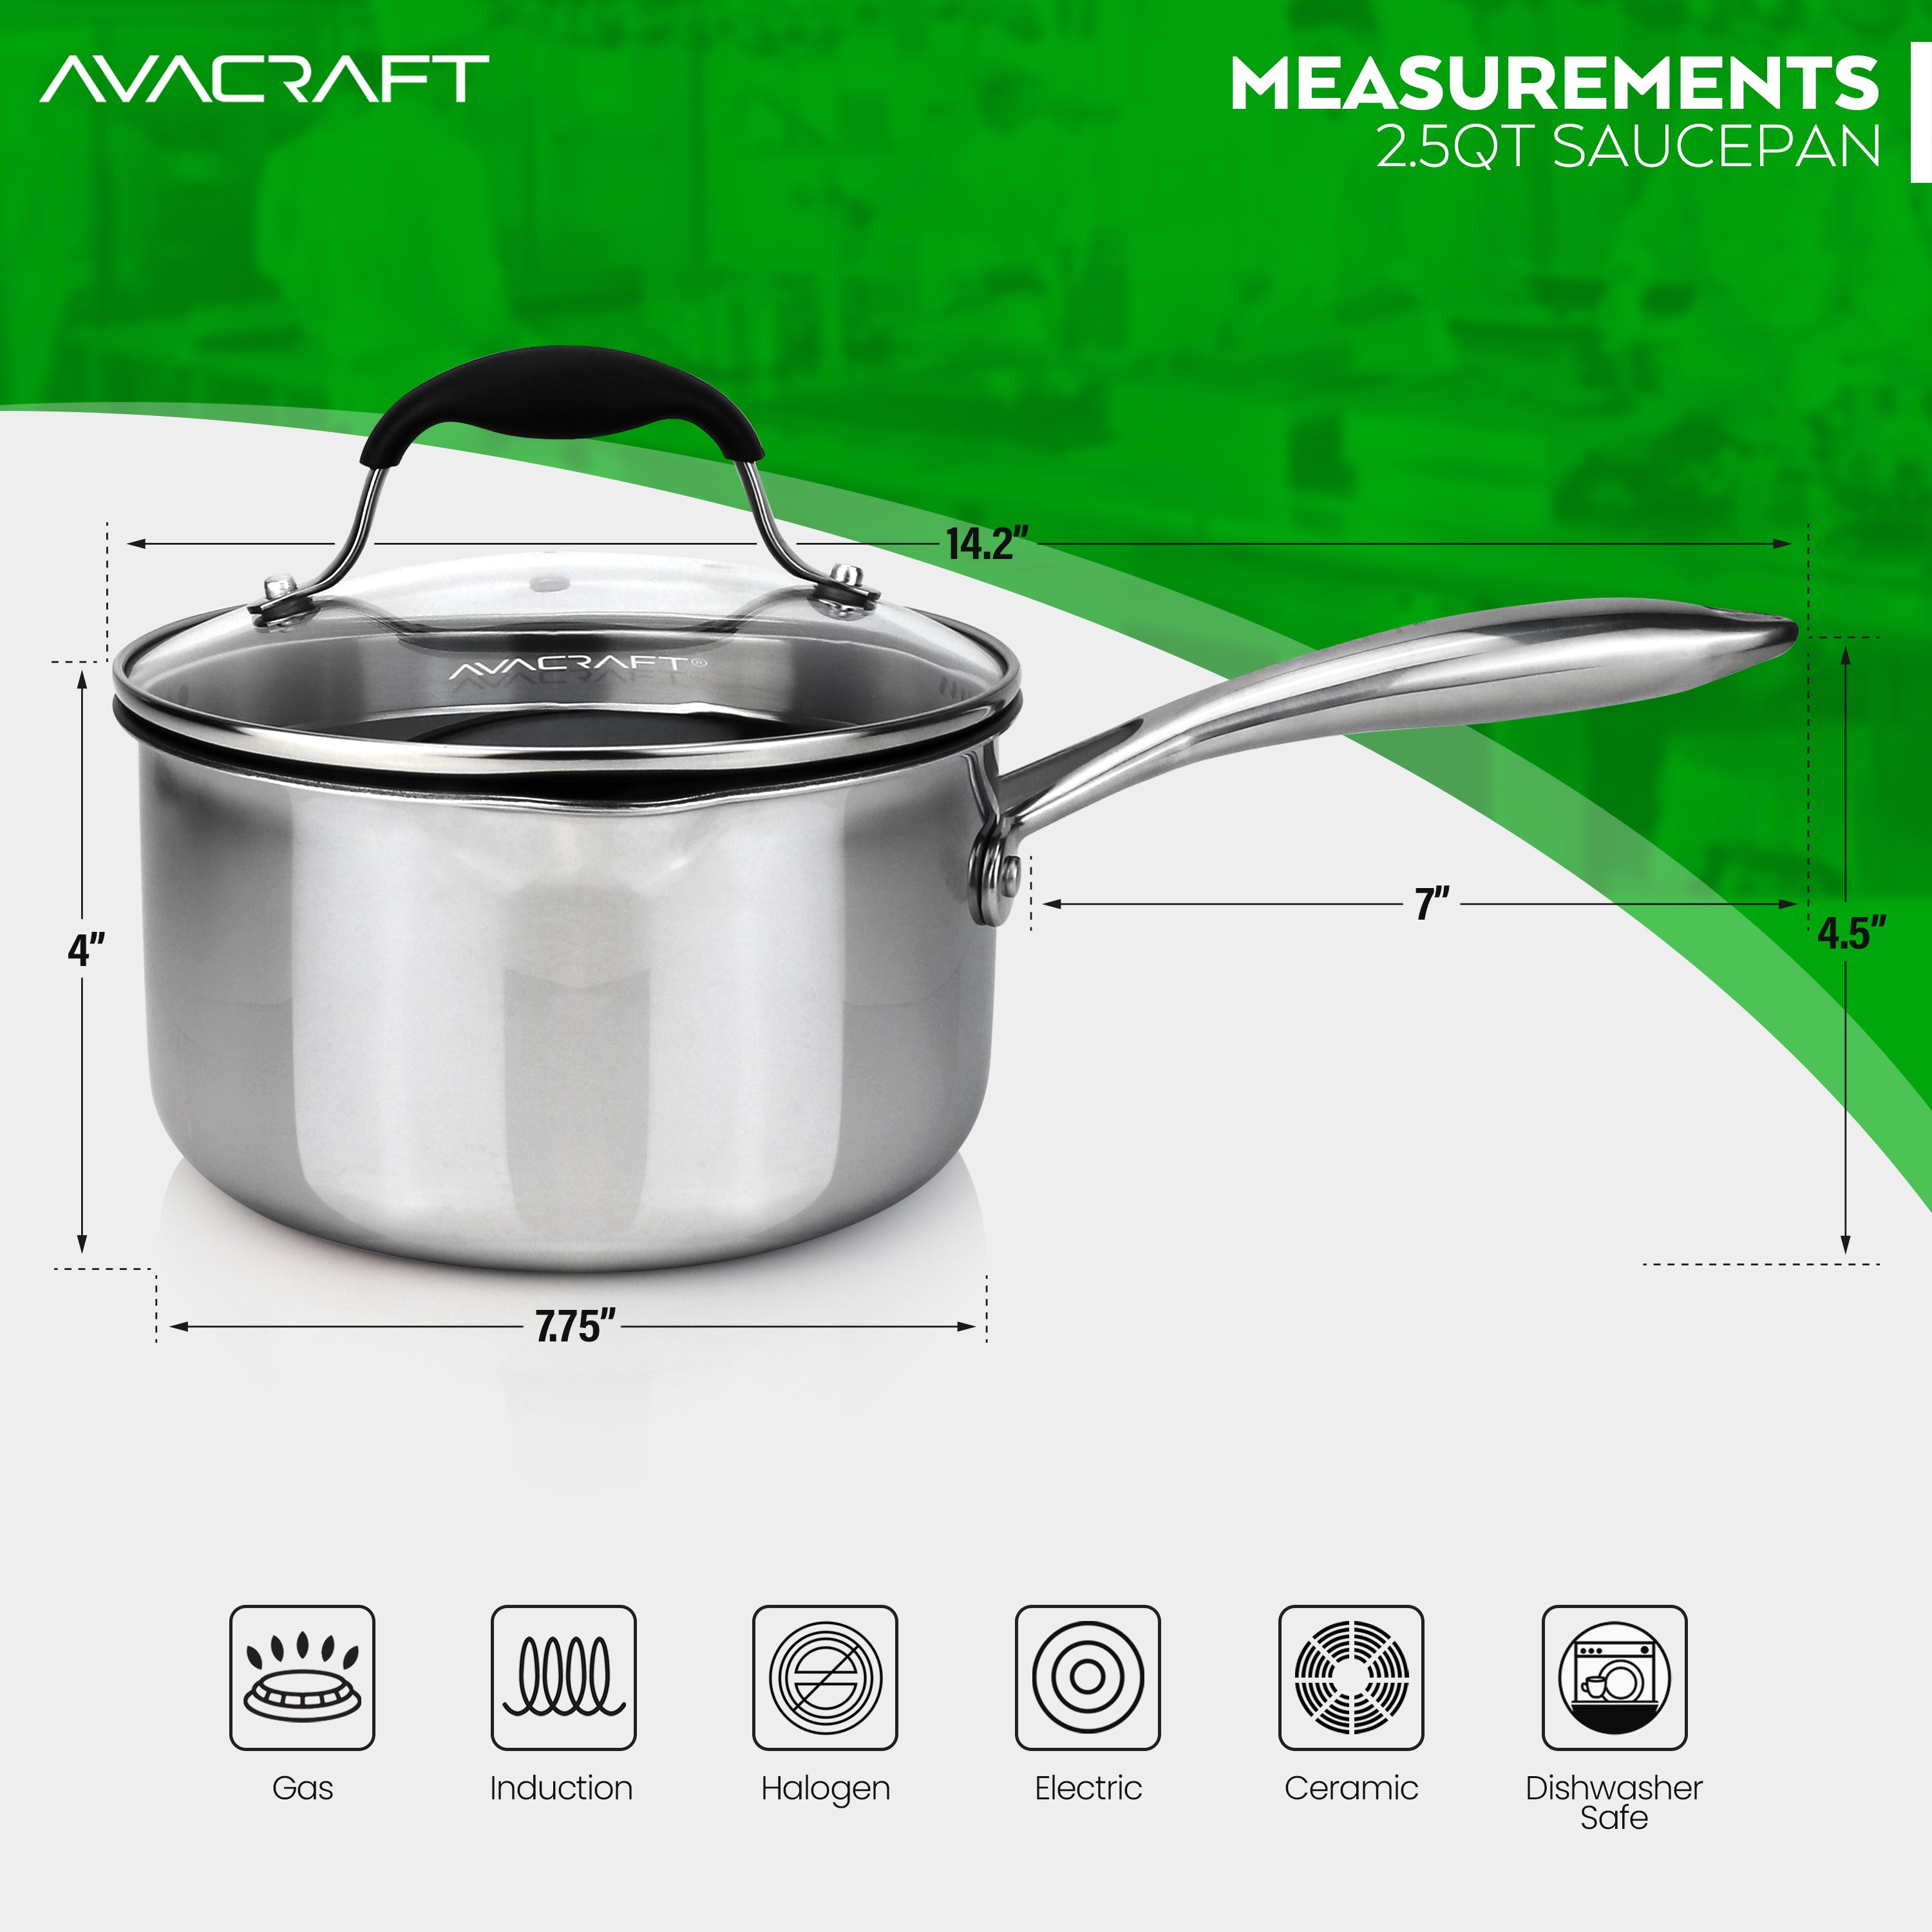 AVACRAFT Tri-Ply Stainless Steel Saucepan with Glass Strainer Lid, Two